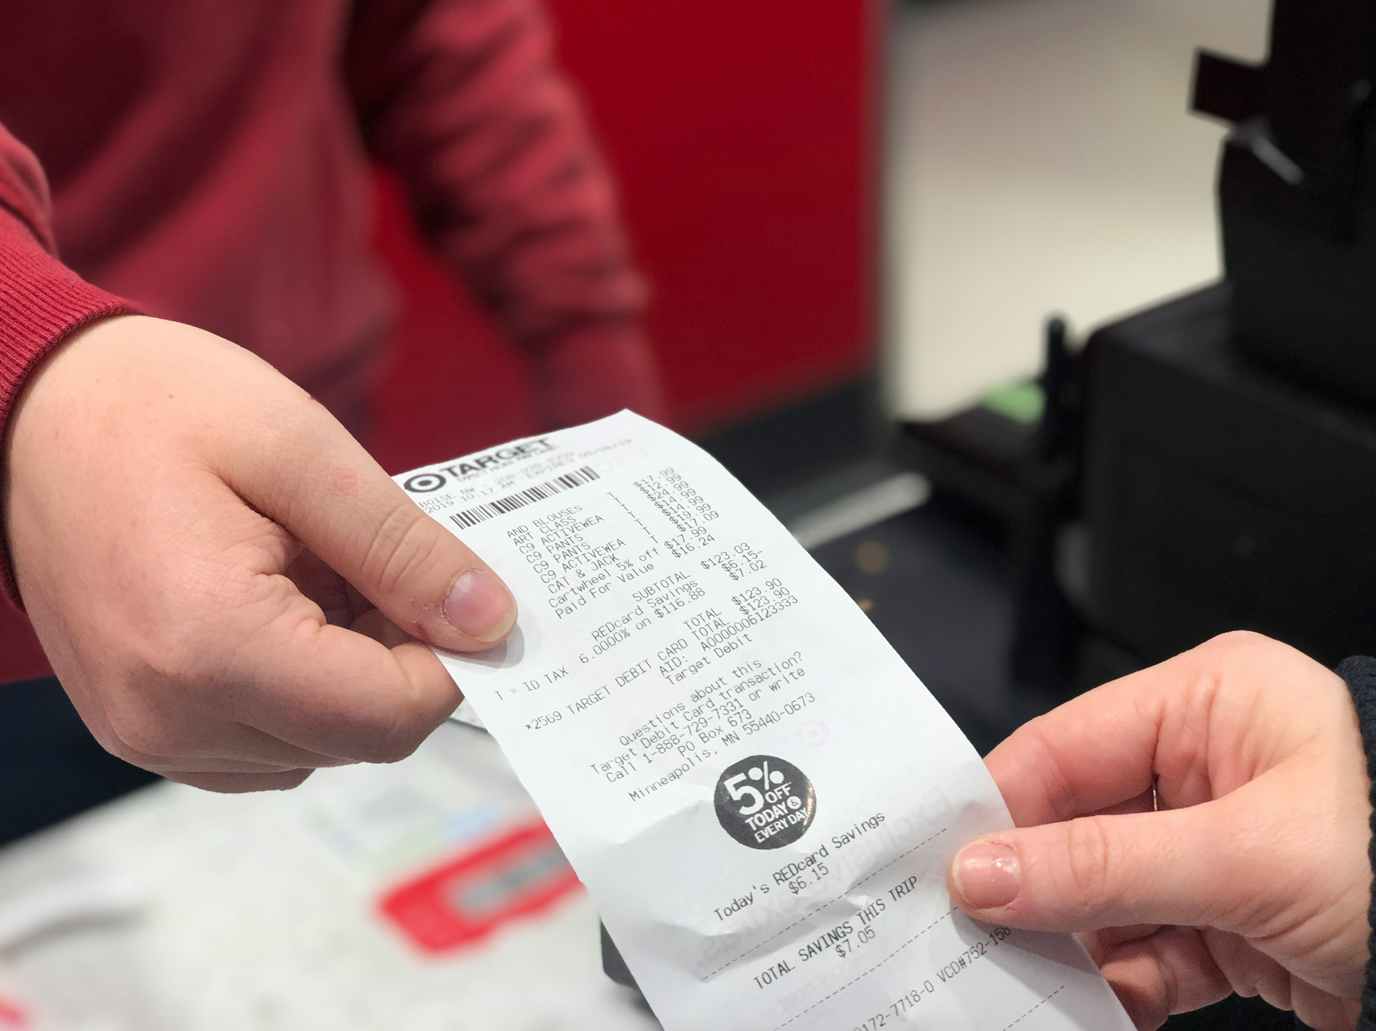 A customer's hand giving a Target receipt to a Target employee at the return counter.